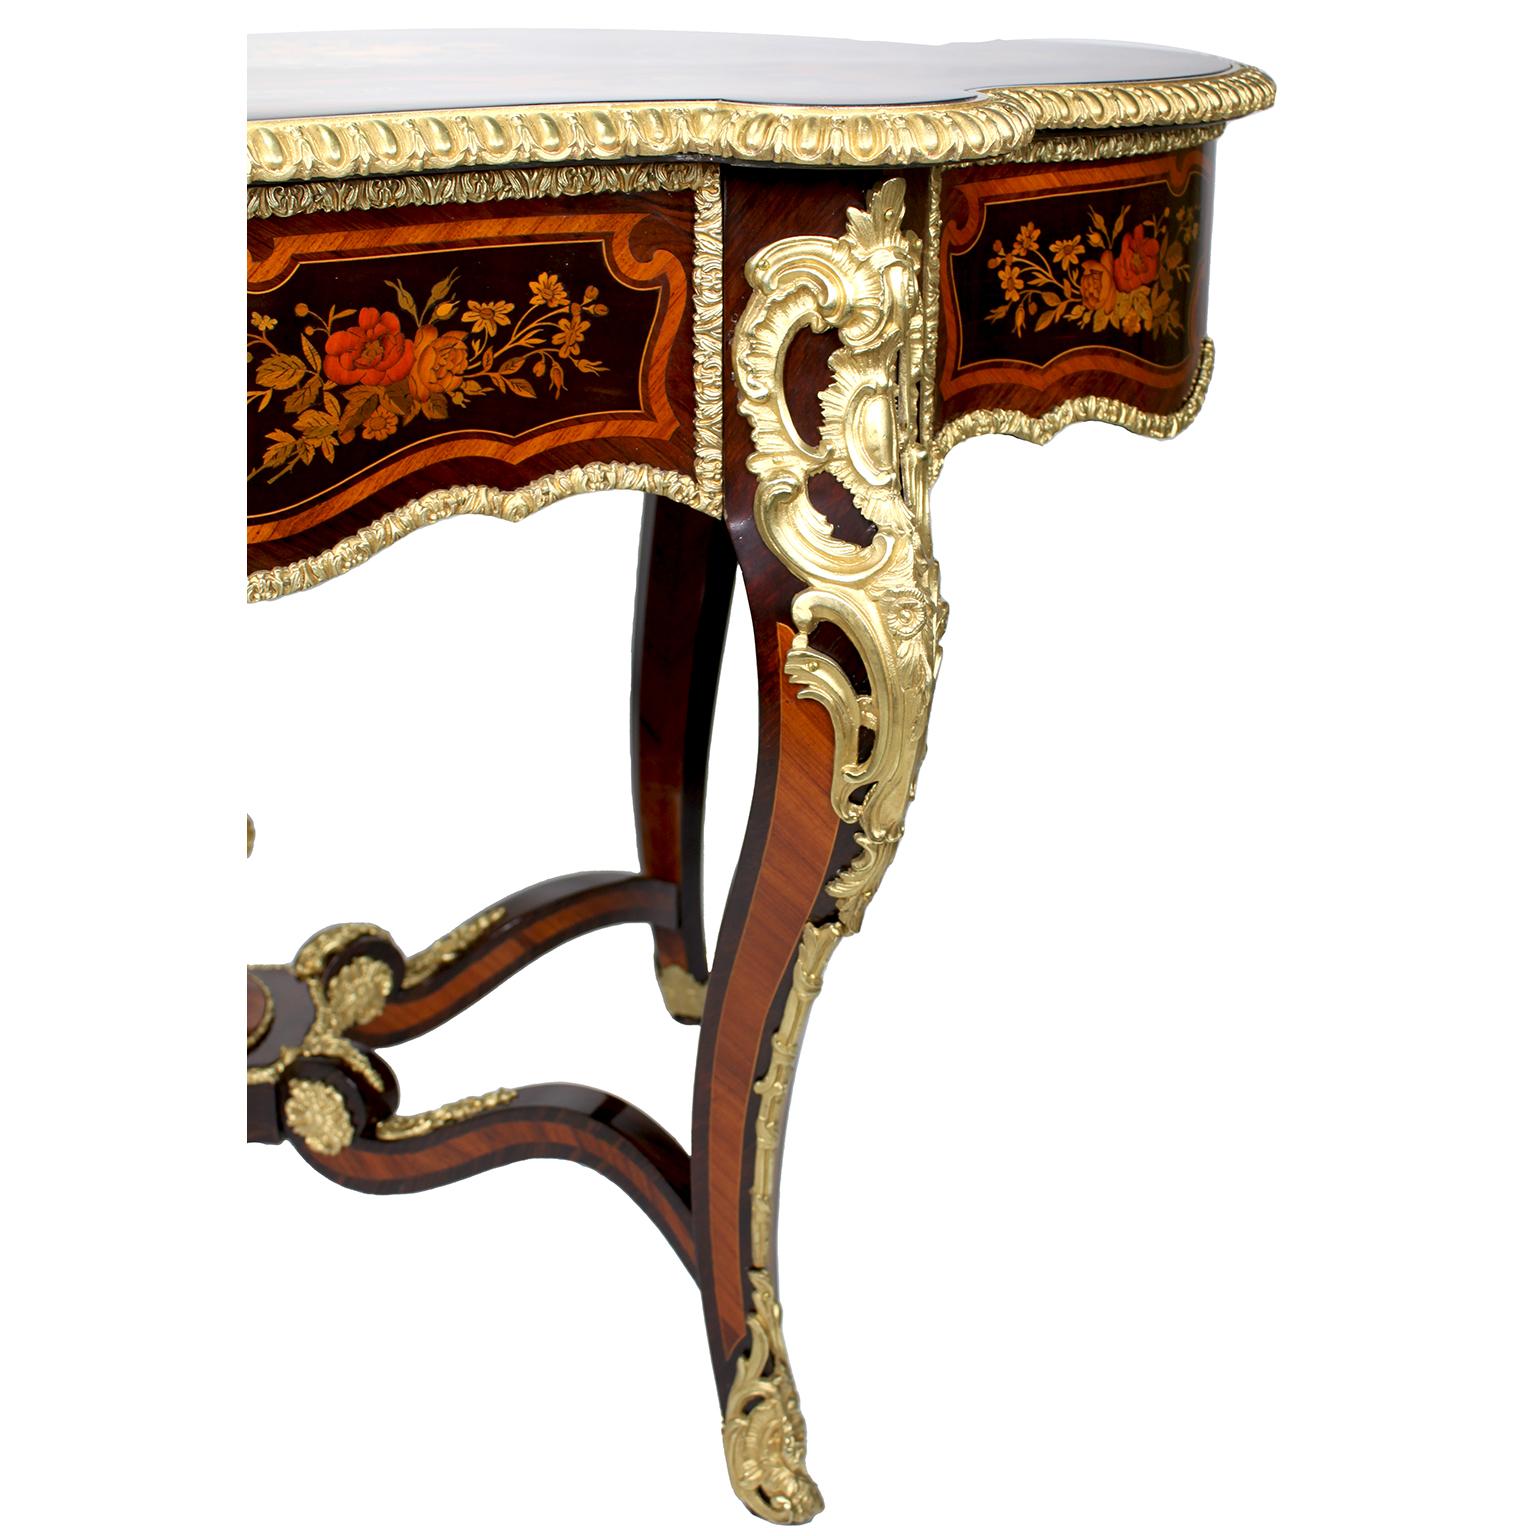 French 19th Century Louis XV Style Gilt-Bronze Mounted Marquetry Center Table For Sale 7